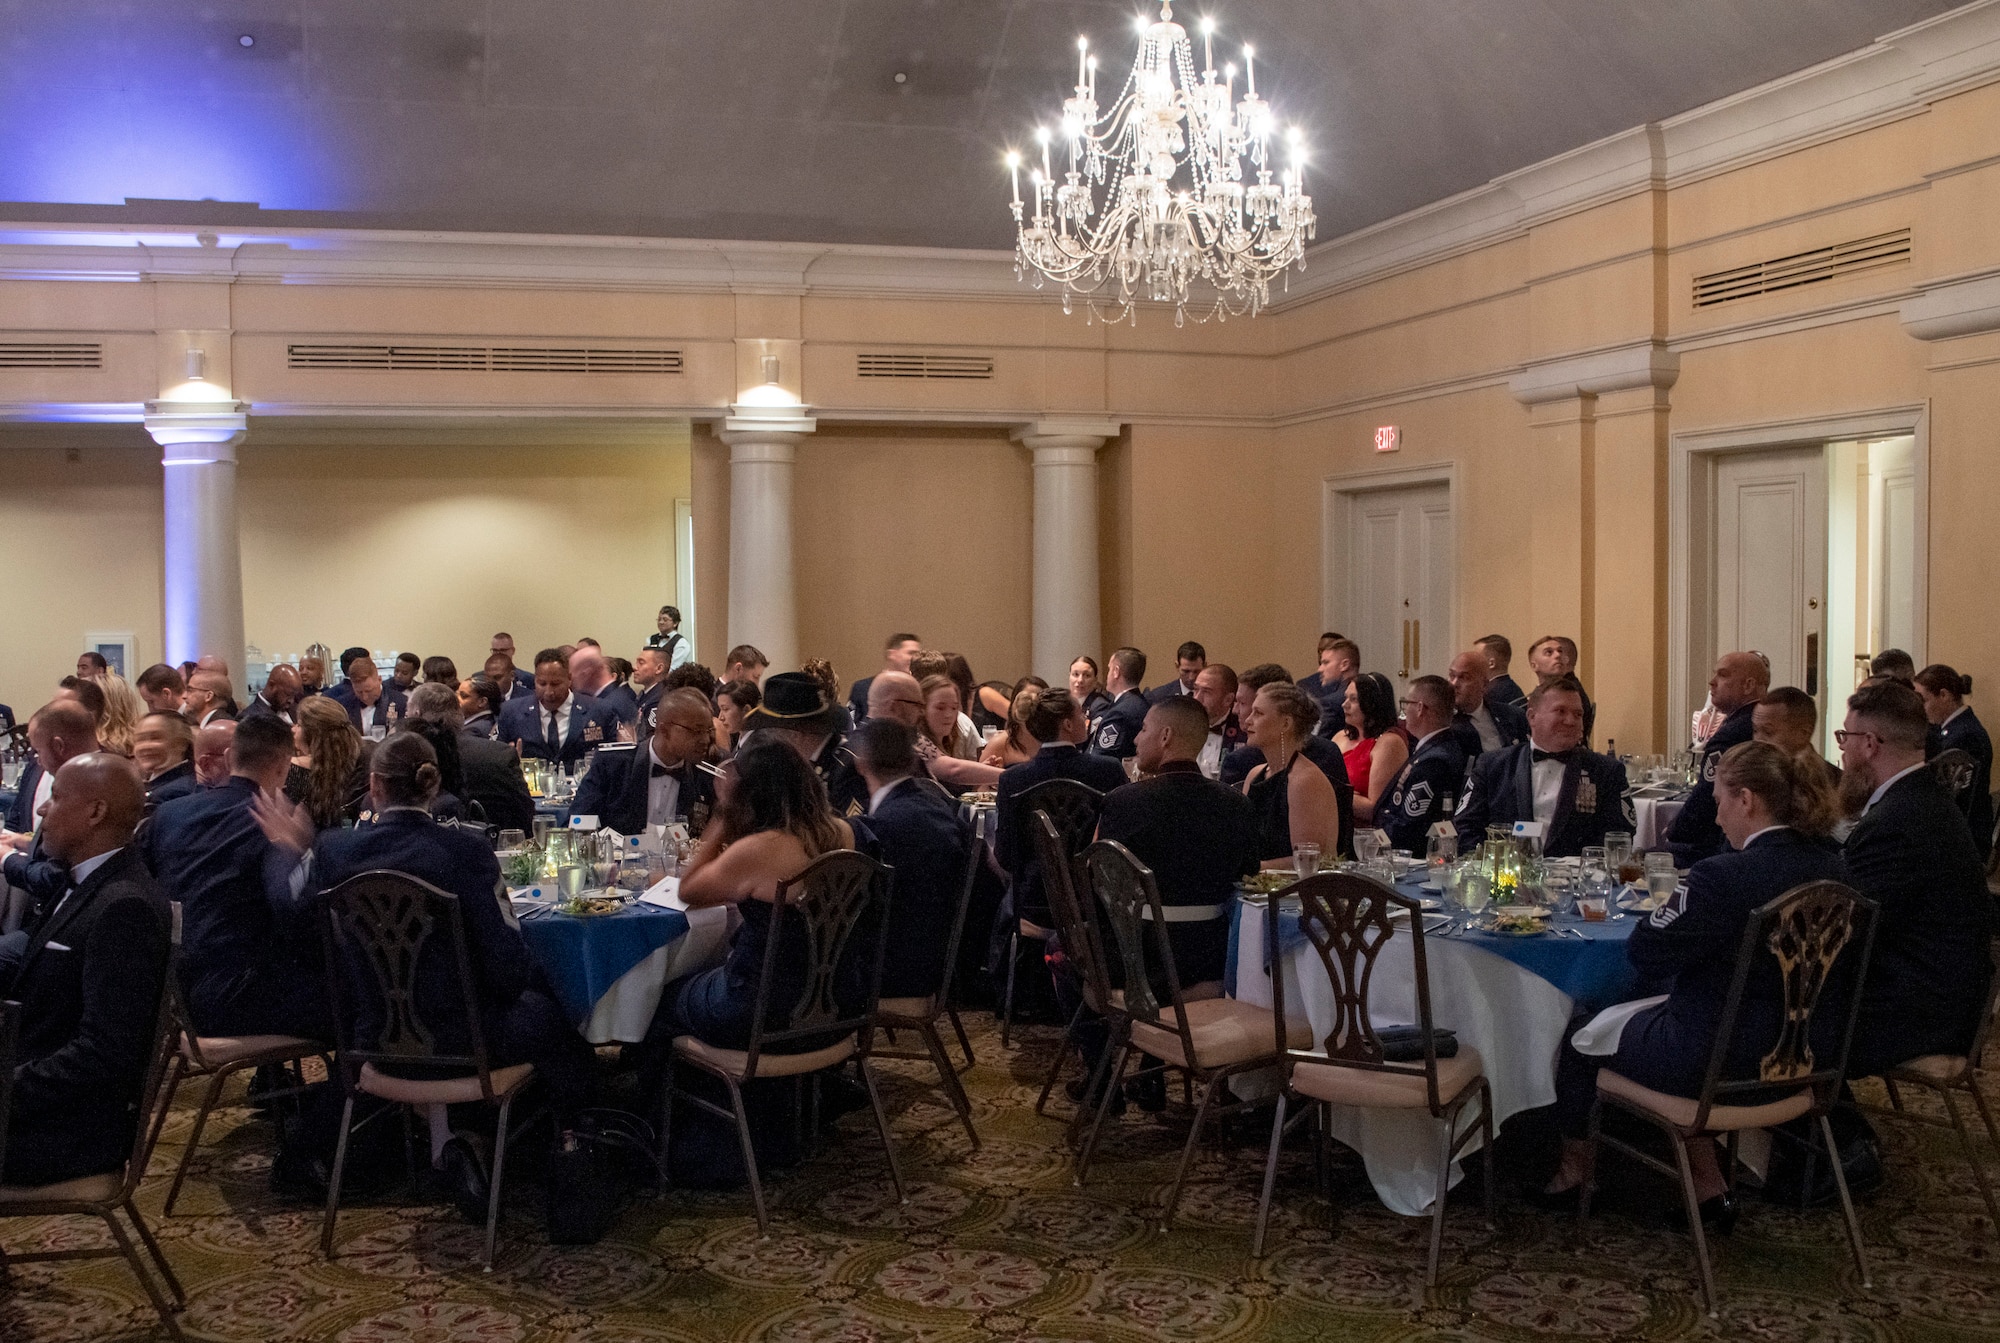 More than 150 servicemembers and civilians attended the Senior Noncommissioned Officer Academy's 50th Anniversary Gala at the Montgomery Country Club, Montgomery, Ala., Nov. 9, 2023. (U.S. Air Force photo/Tech. Sgt. John Clark)